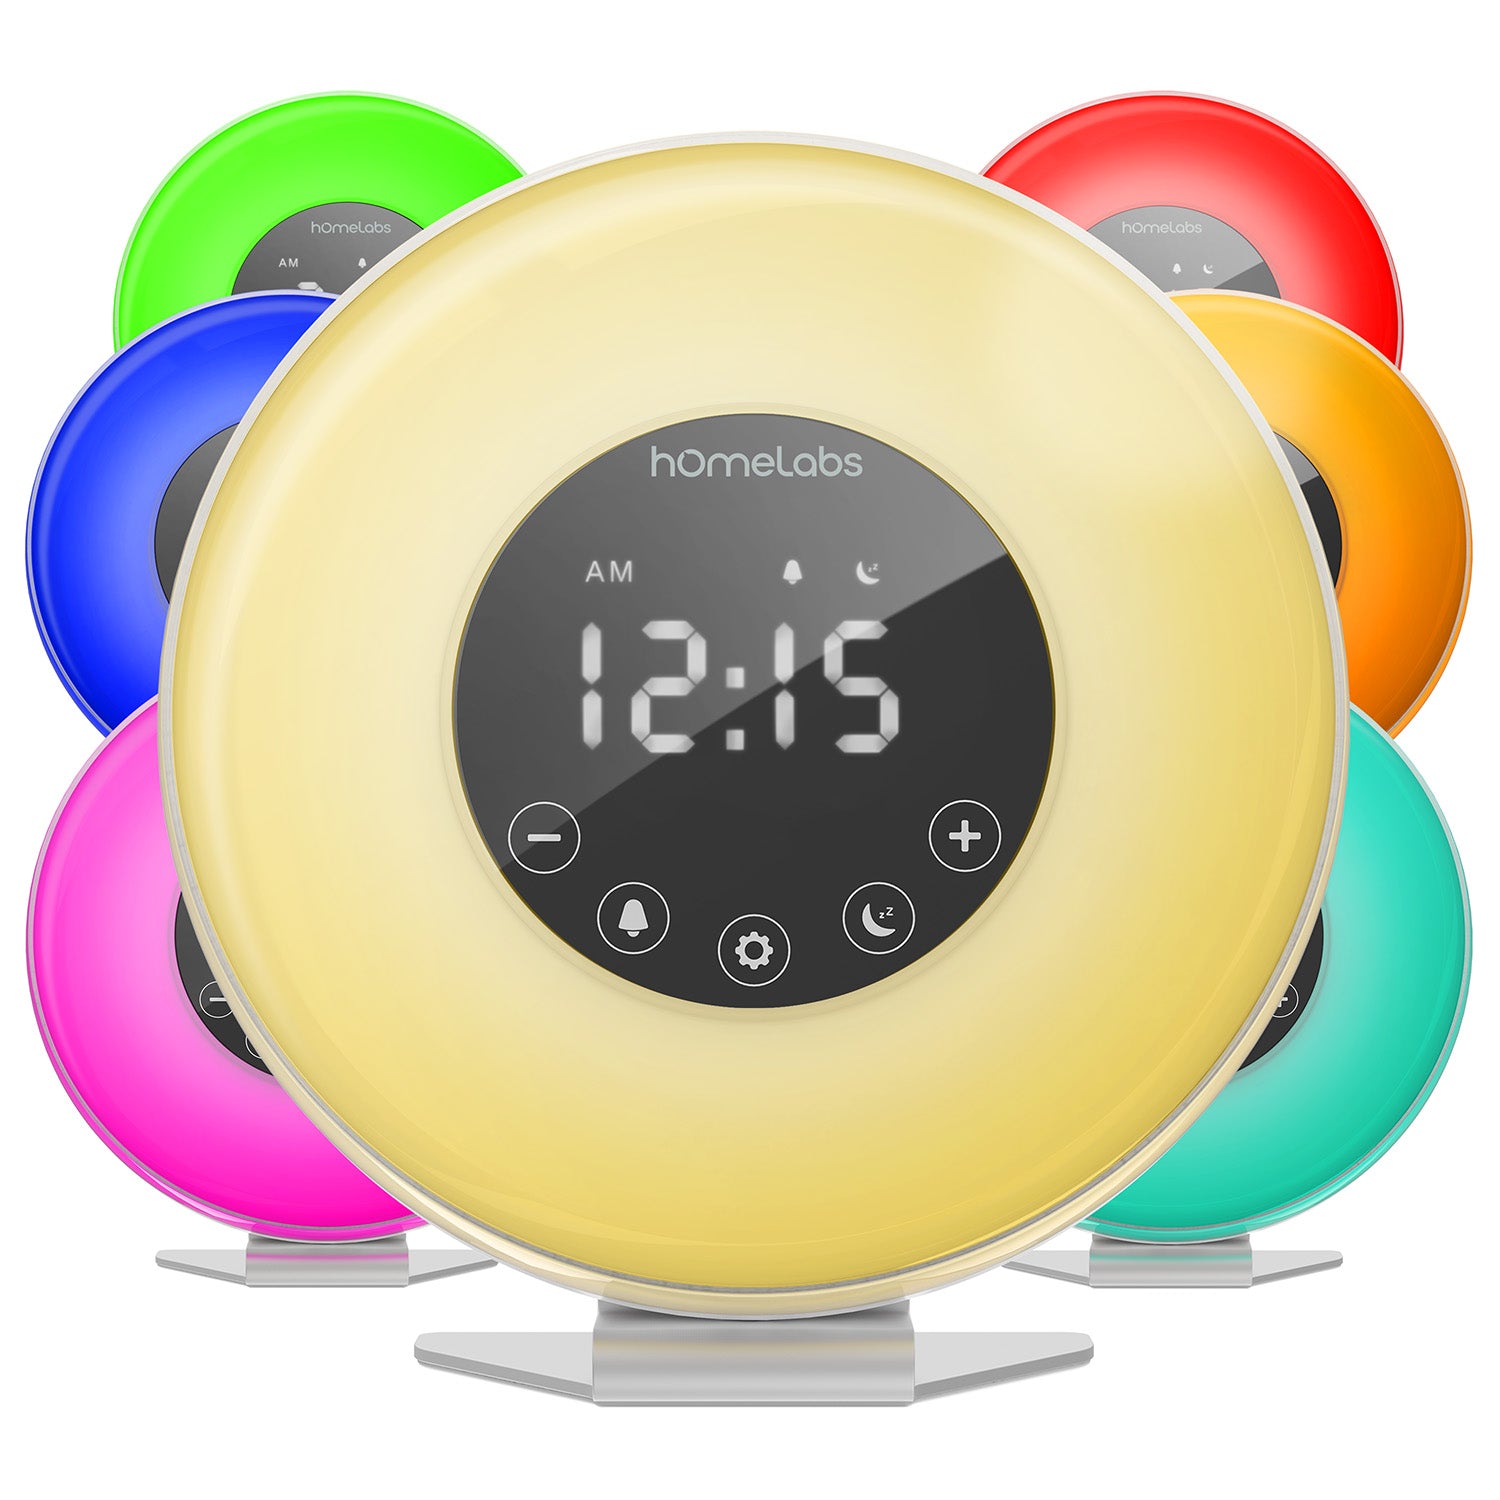 hOmeLabs Sunrise Alarm Clock - Digital LED Clock with 6 Color Switch and FM Radio for Bedrooms - Multiple Nature Sounds Sunset Simulation & Touch Control - with Snooze Function for Heavy Sleepers - image 1 of 9